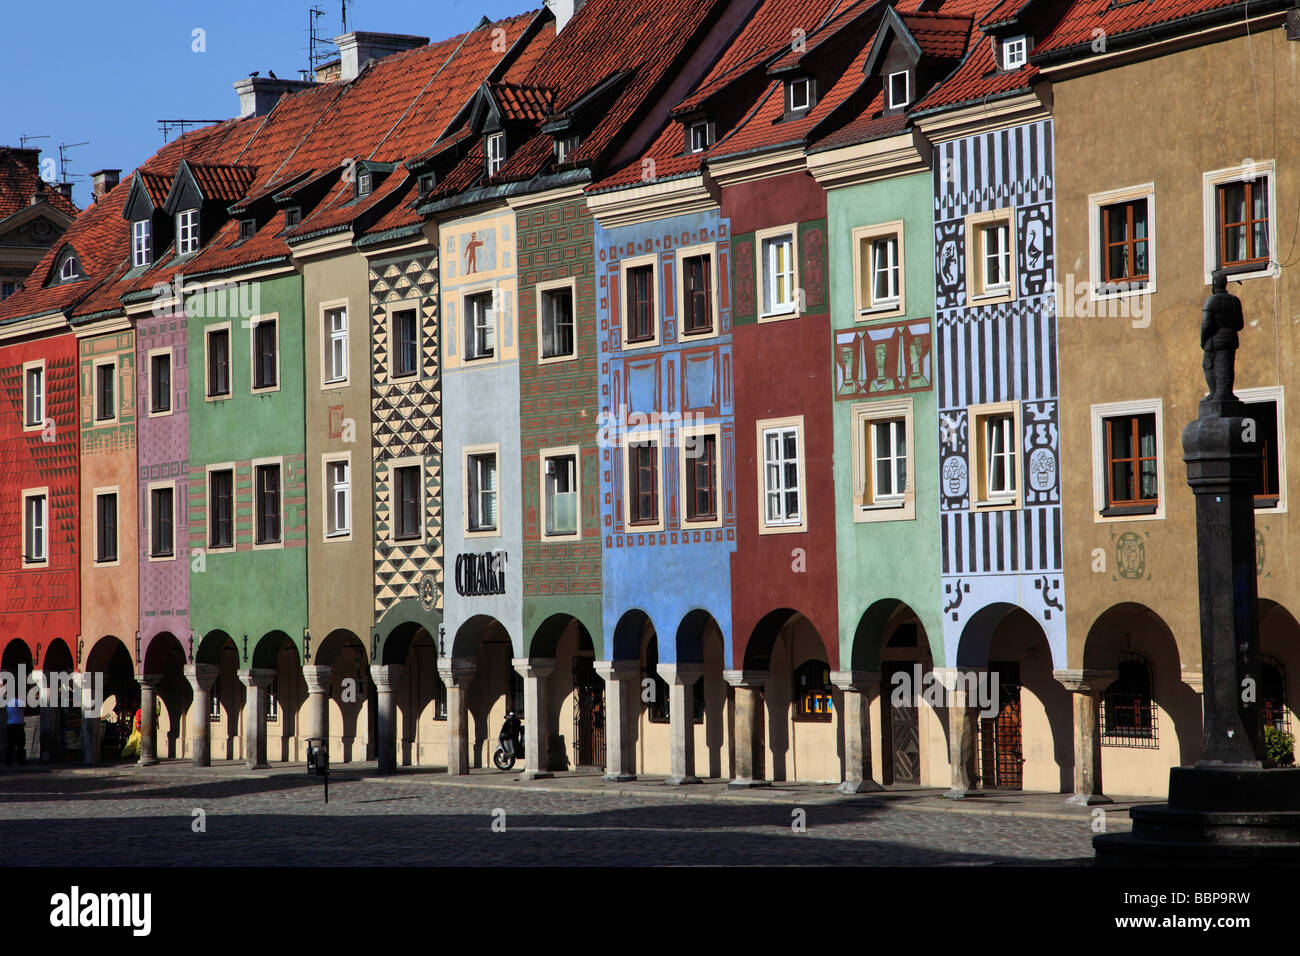 Poland Poznan Old Market Square traders houses Stock Photo